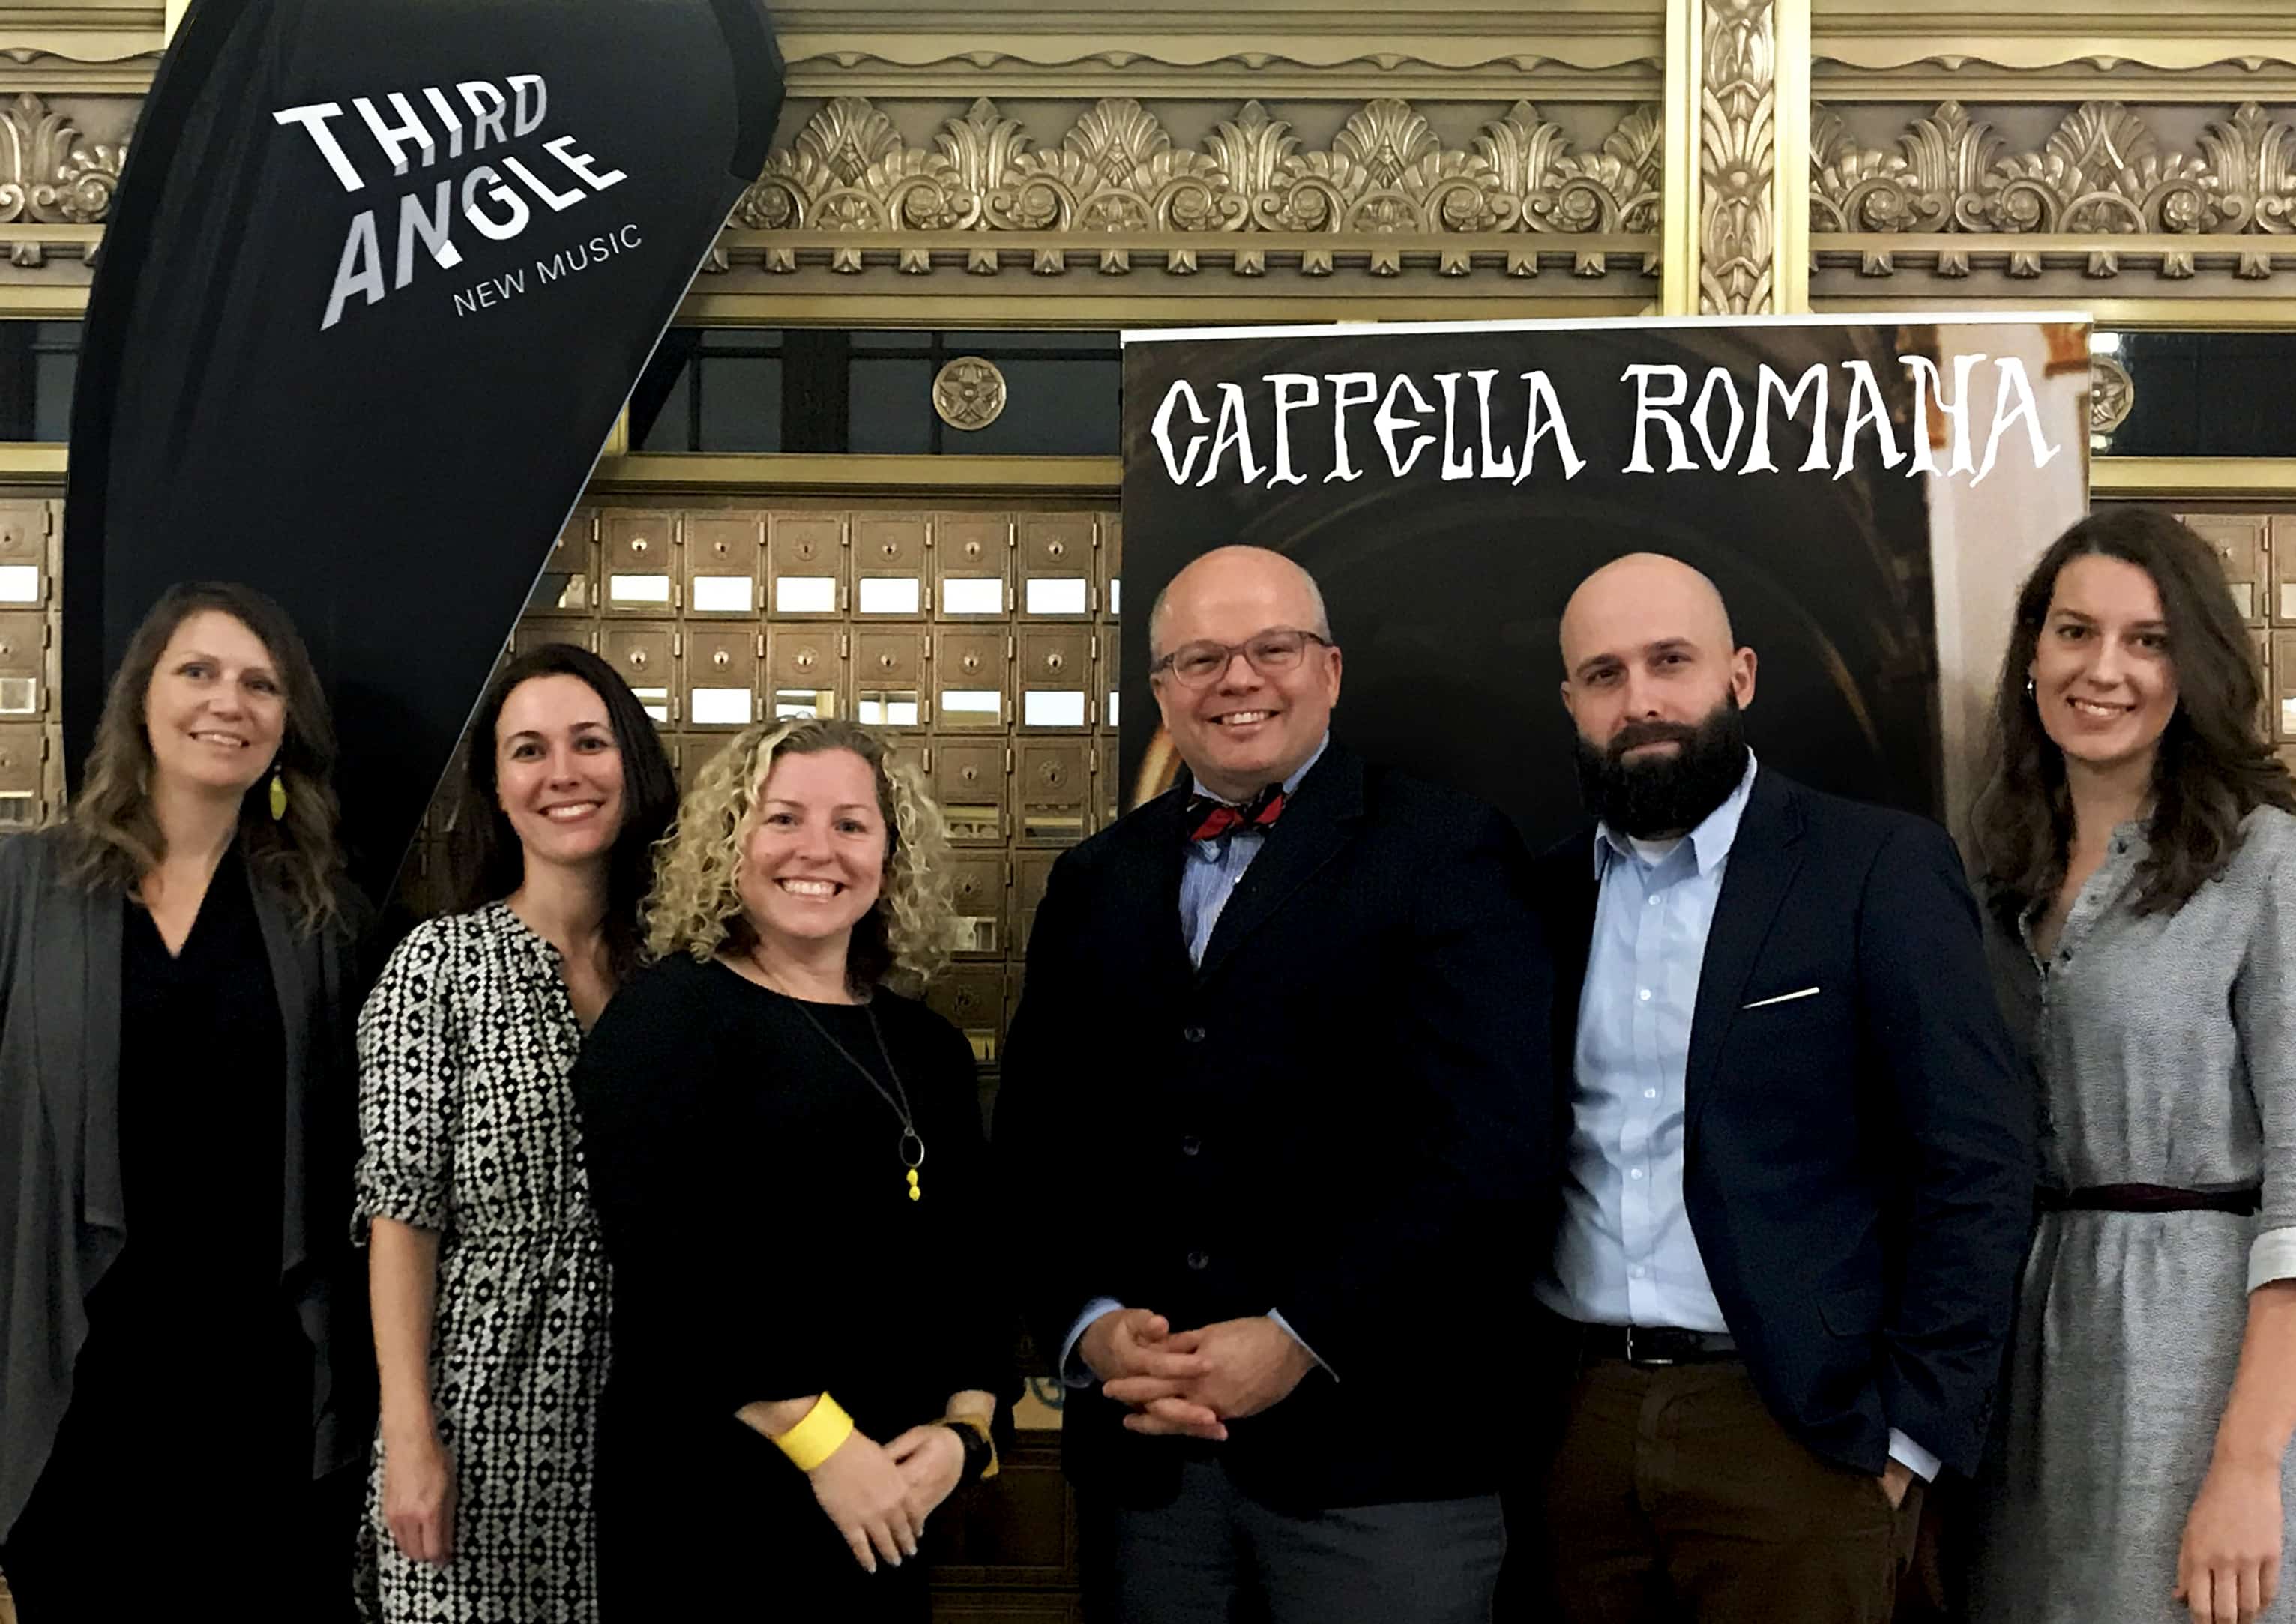 Cappella Romana and Third Angle New Music share historic downtown workspace